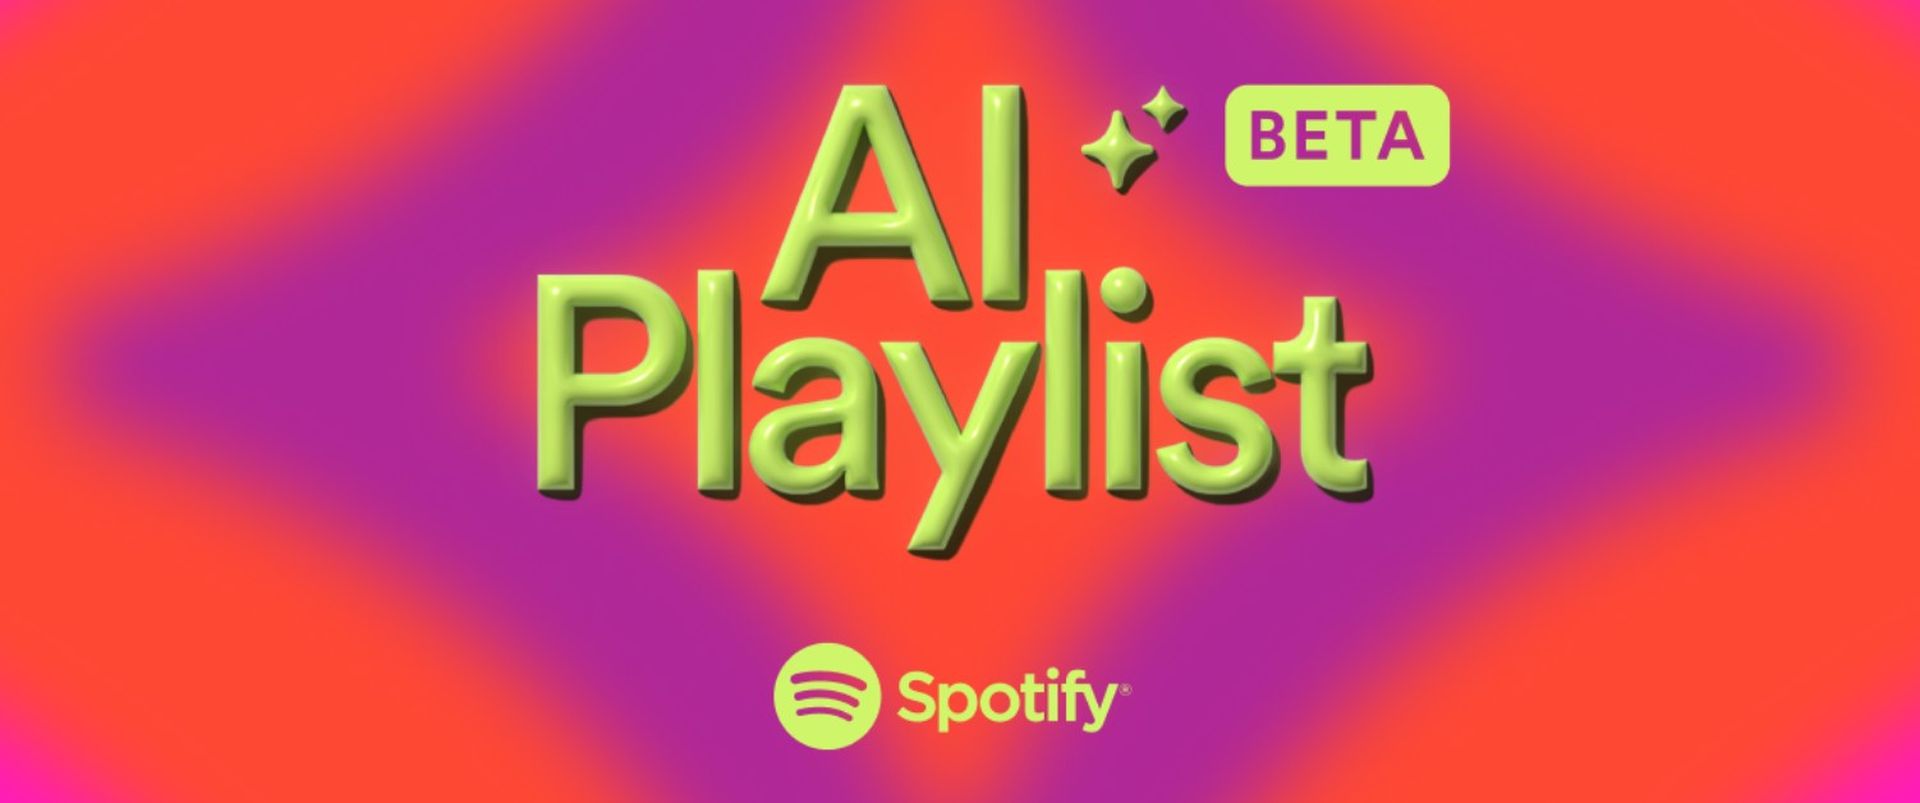 Spotify has introduced its AI Playlist feature